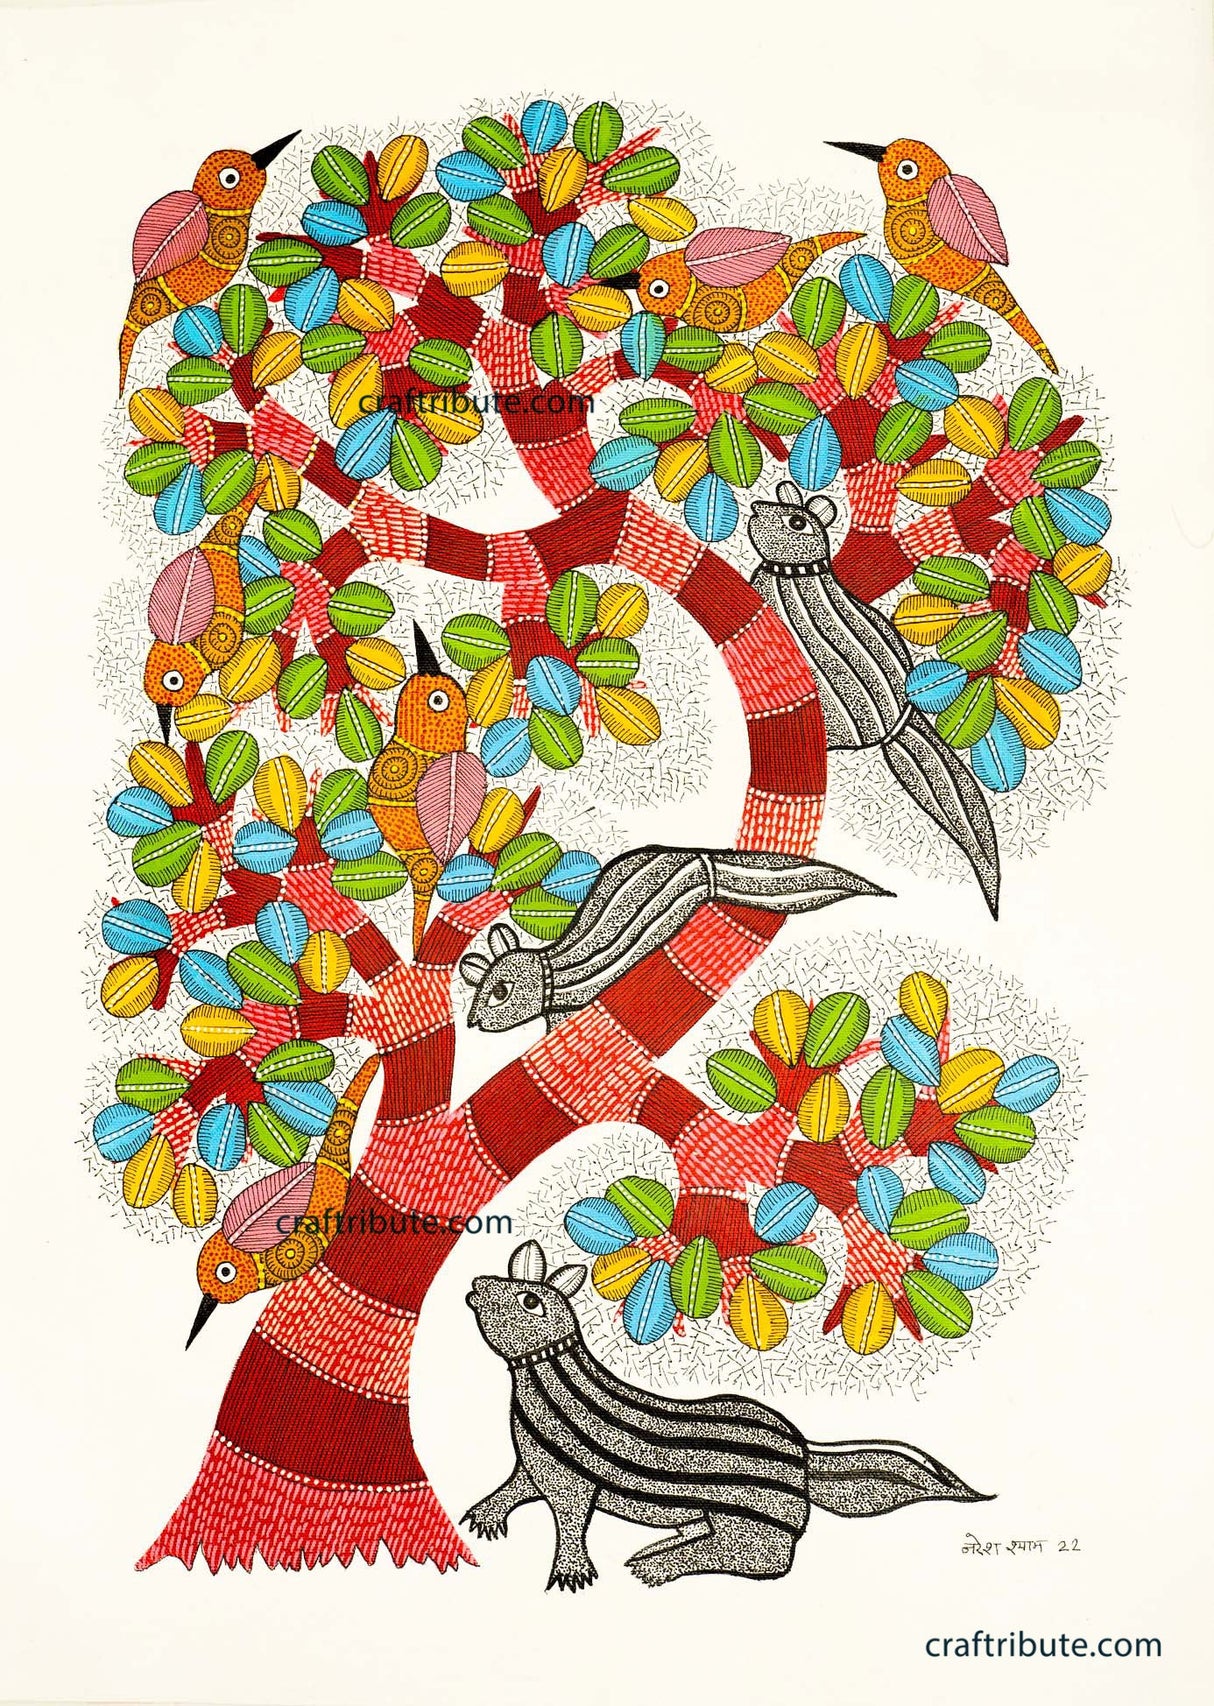 Gond Painting – Tree & Squirrels